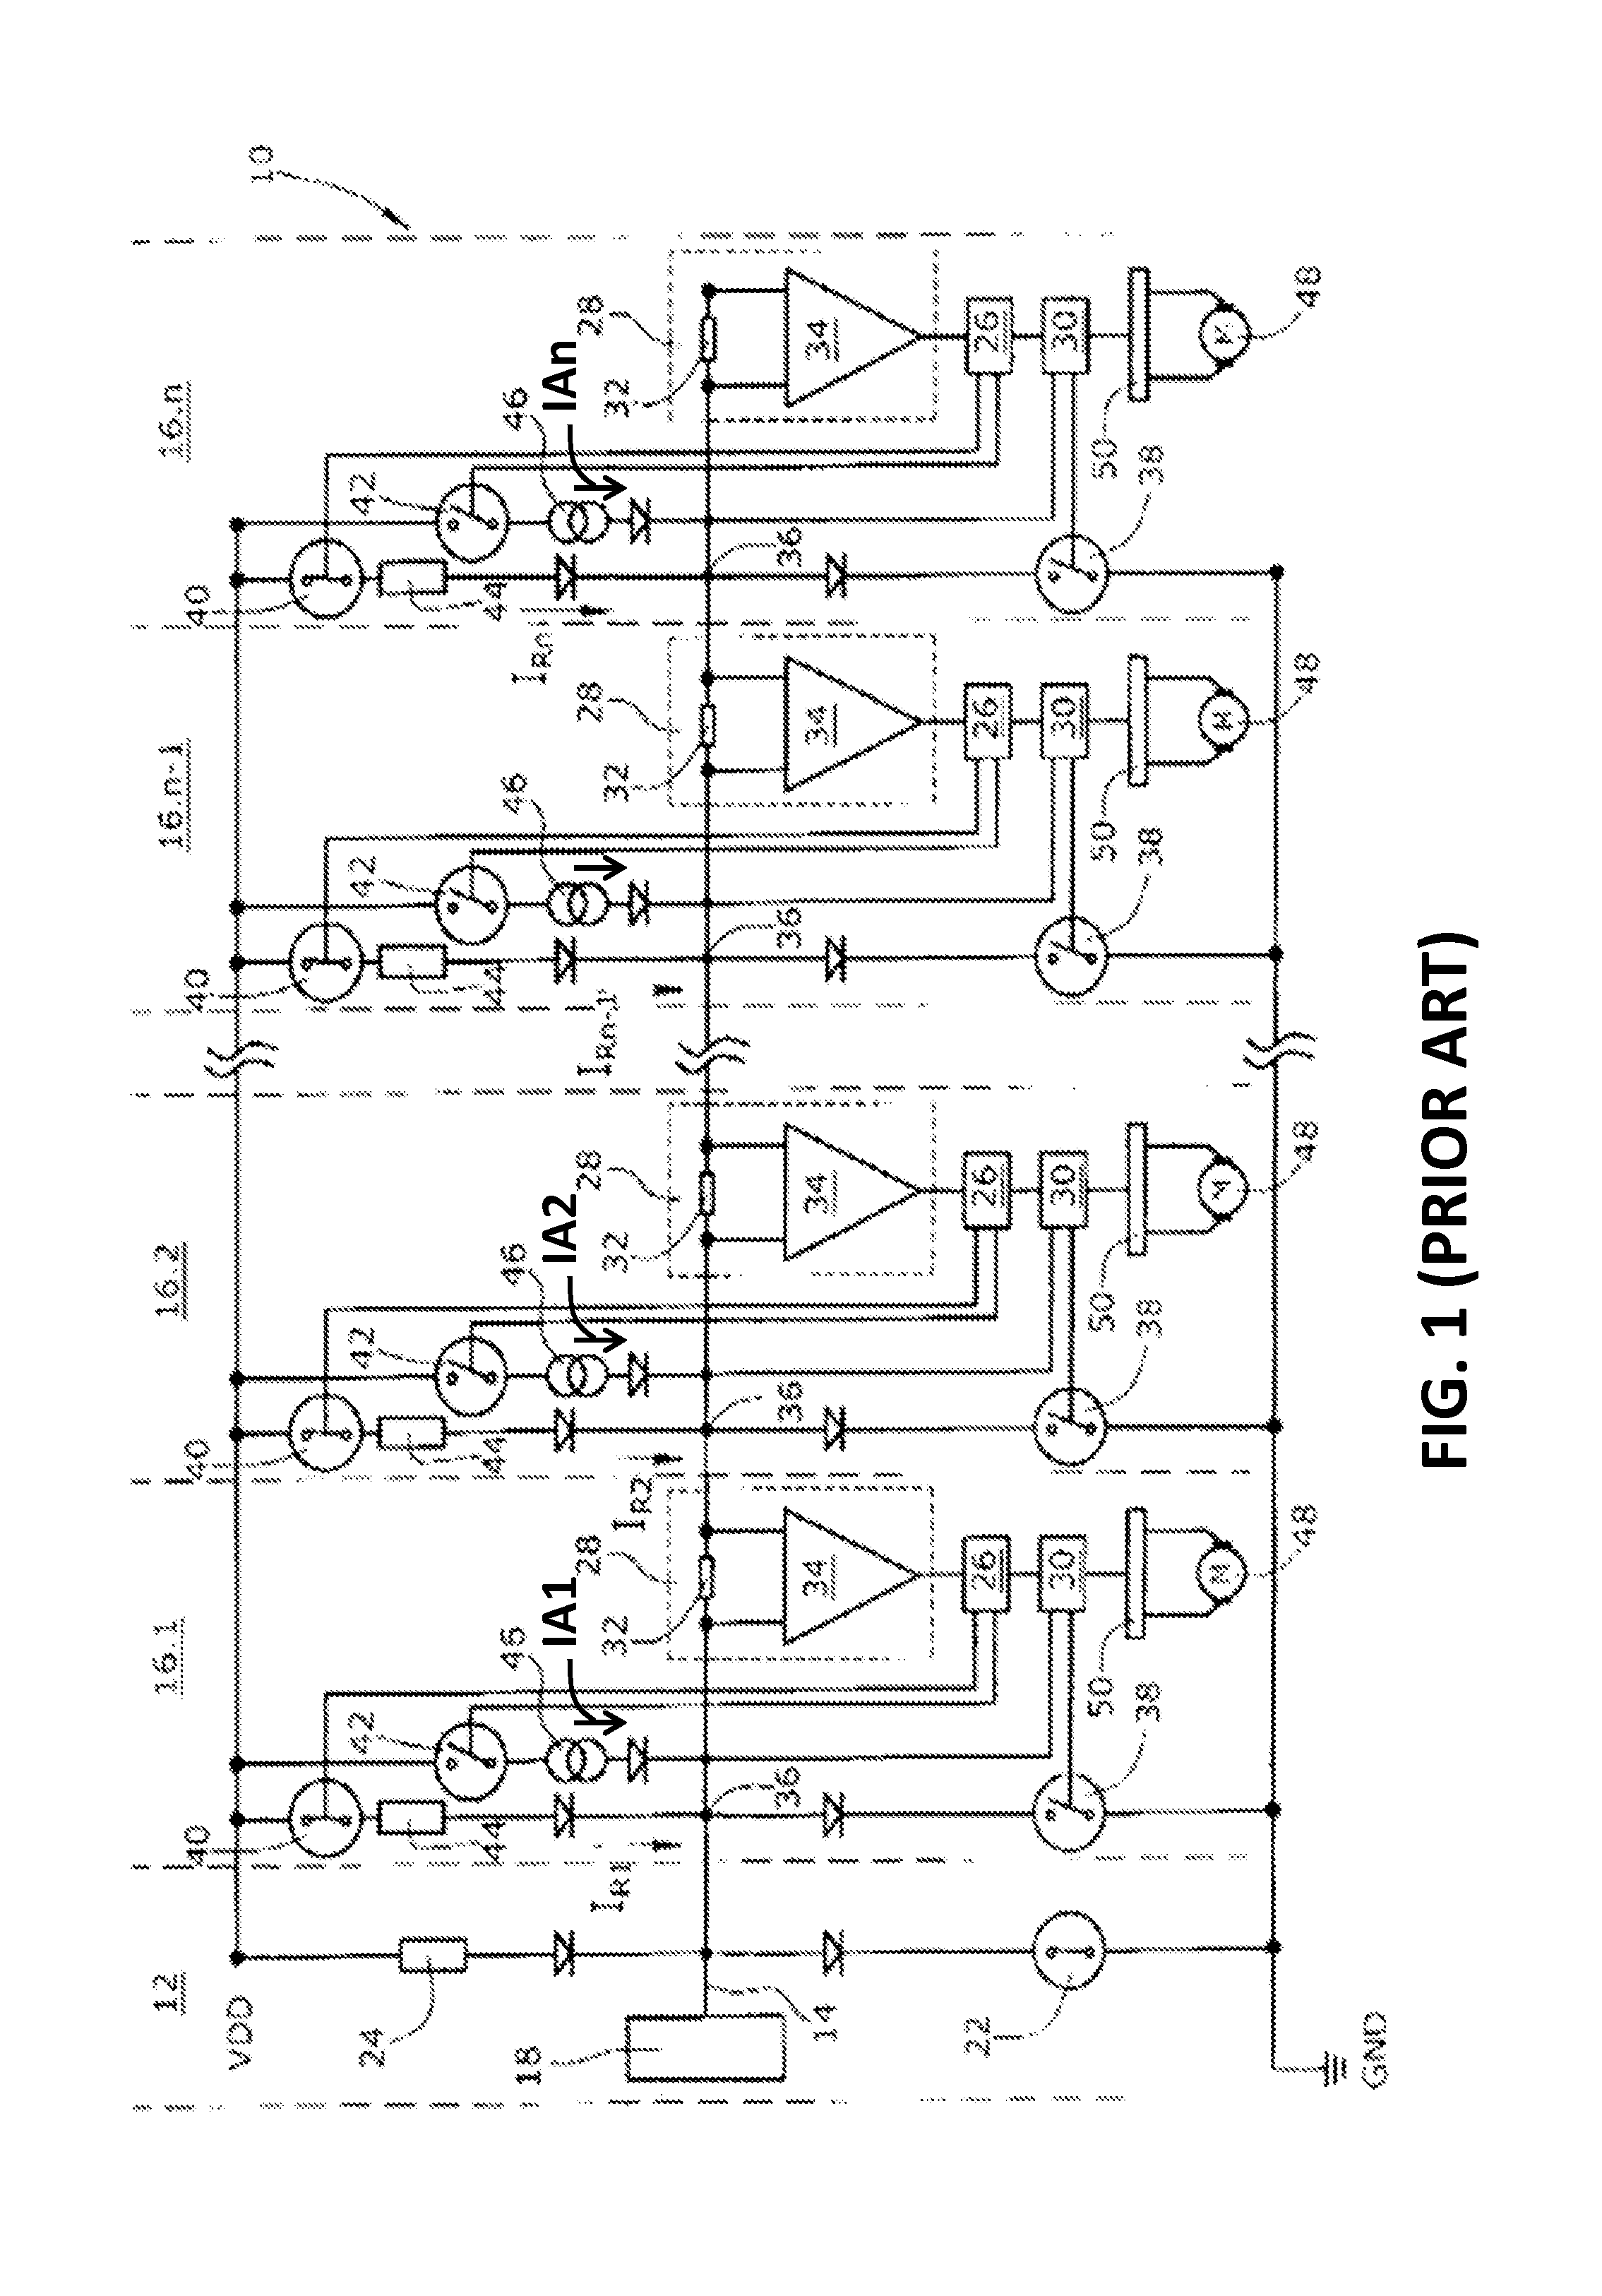 Method for addressing the participants of a bus system